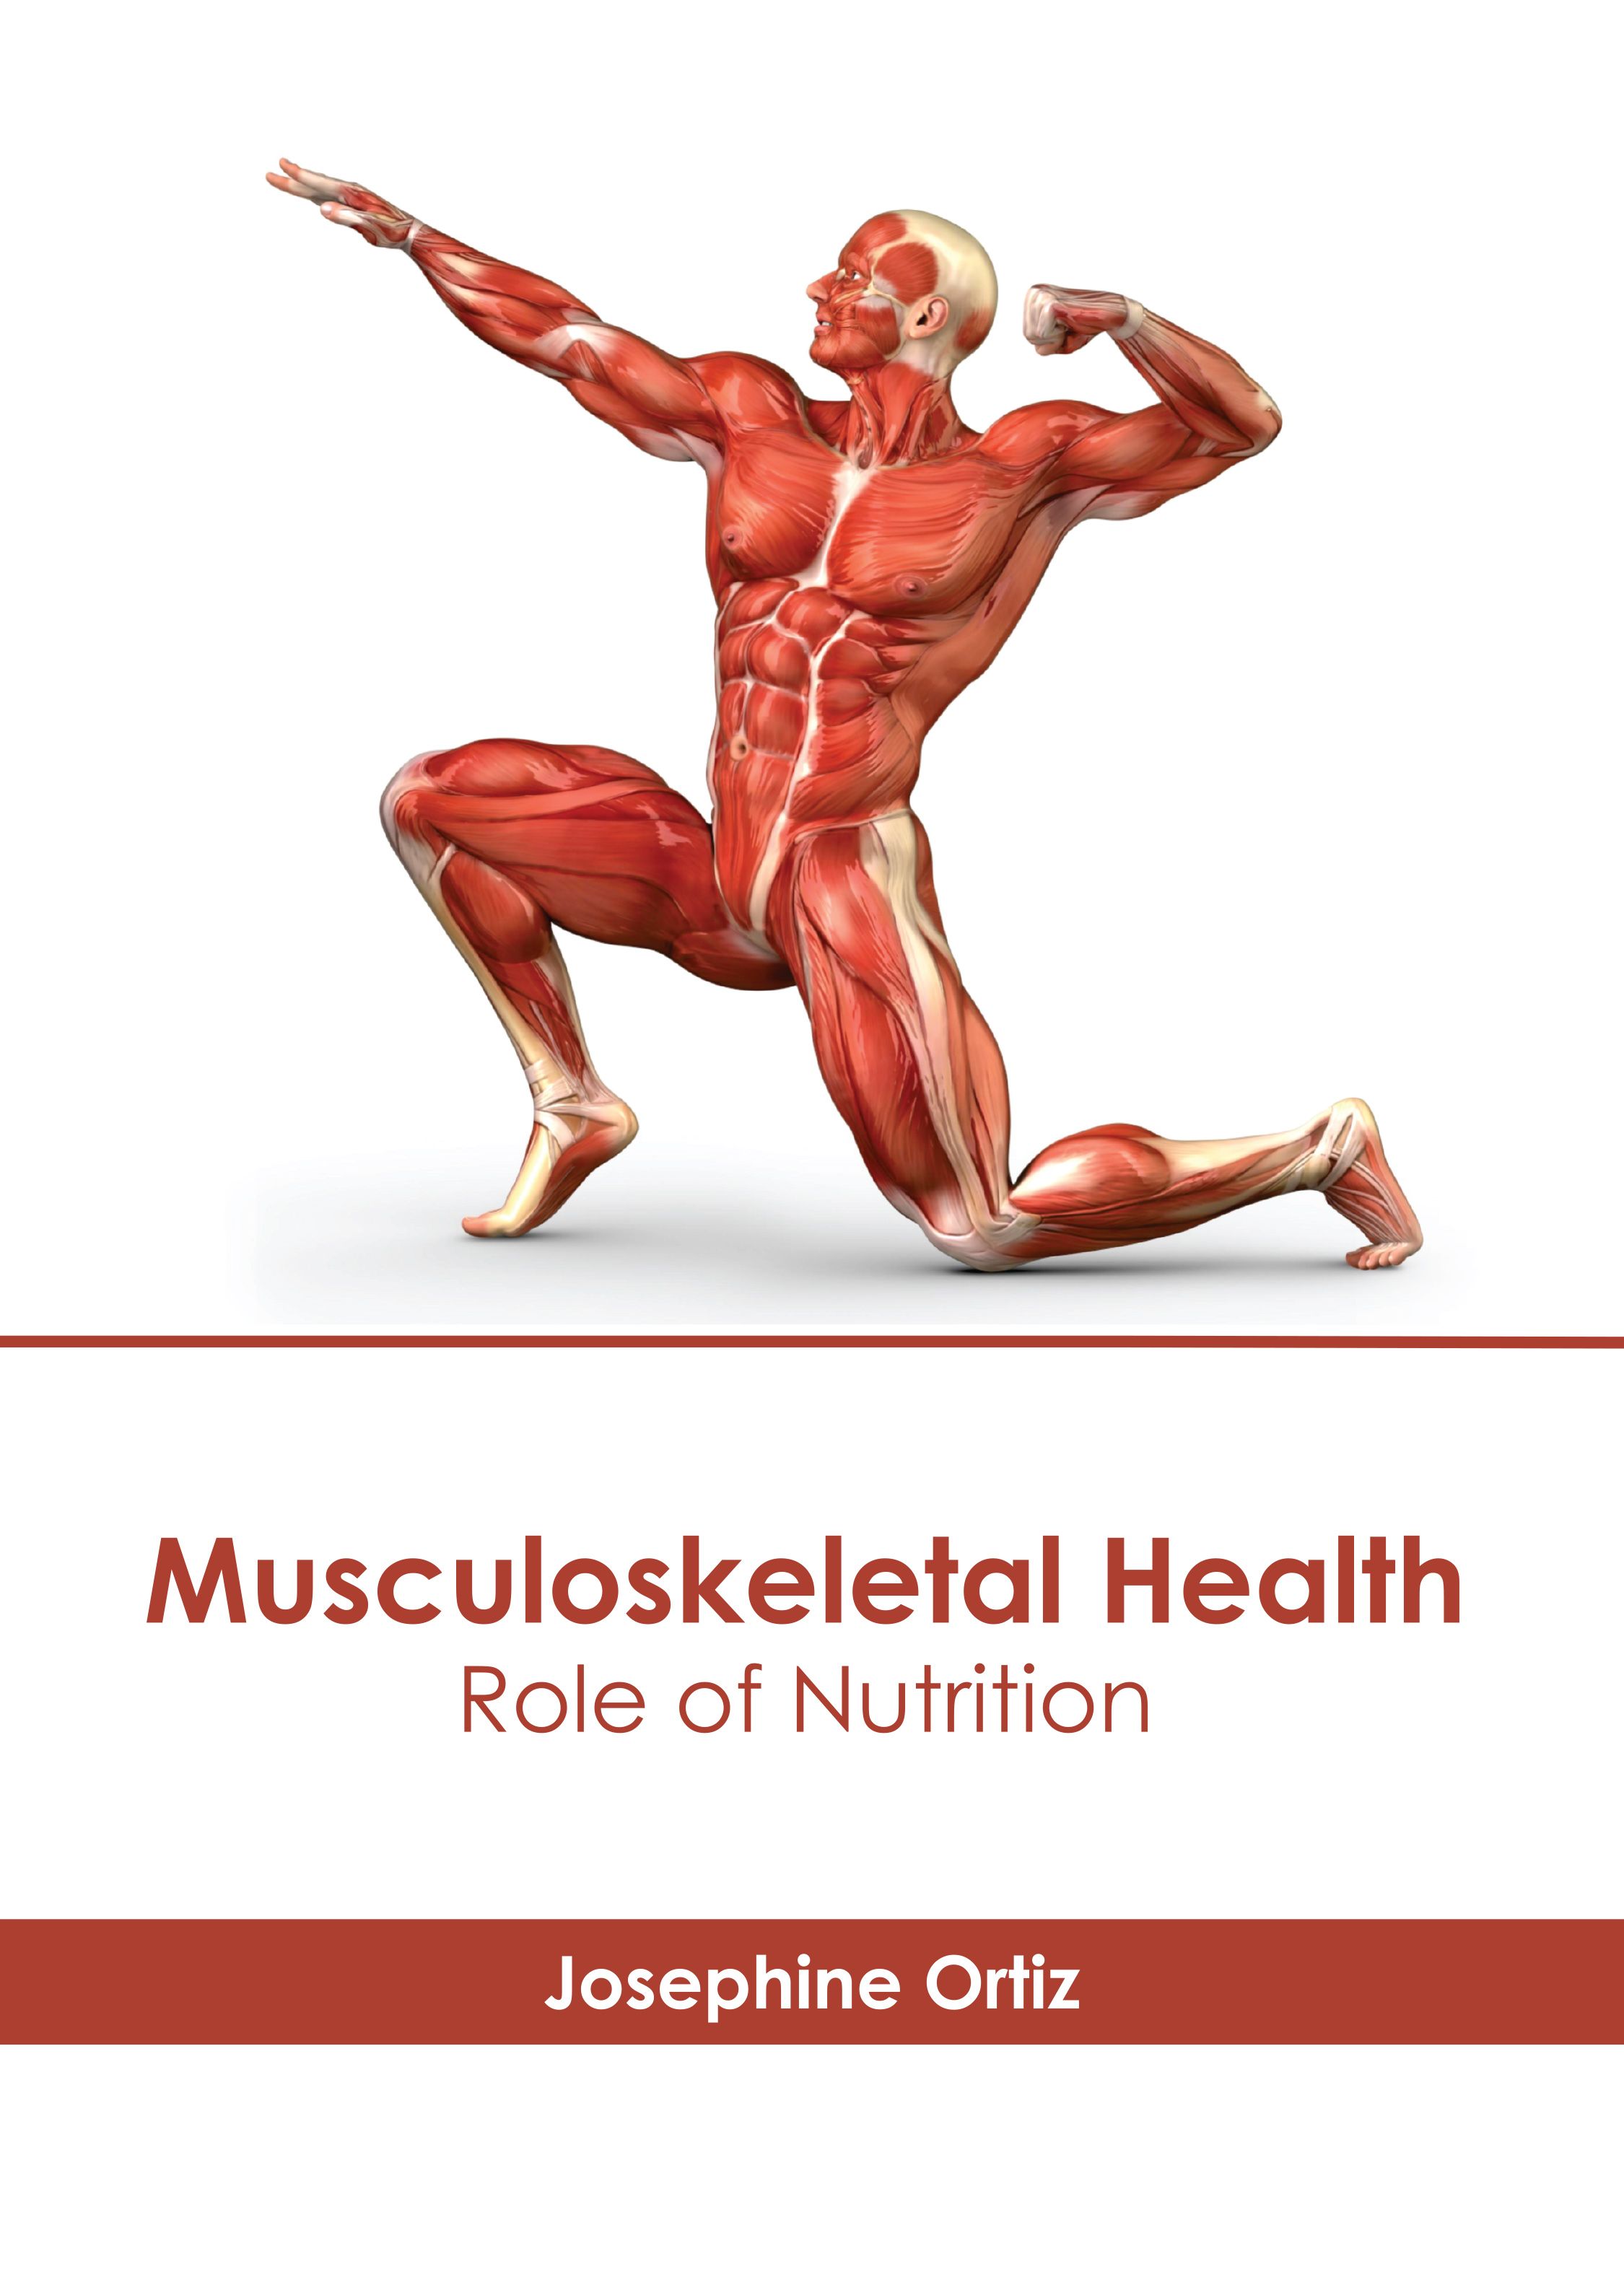 MUSCULOSKELETAL HEALTH: ROLE OF NUTRITION